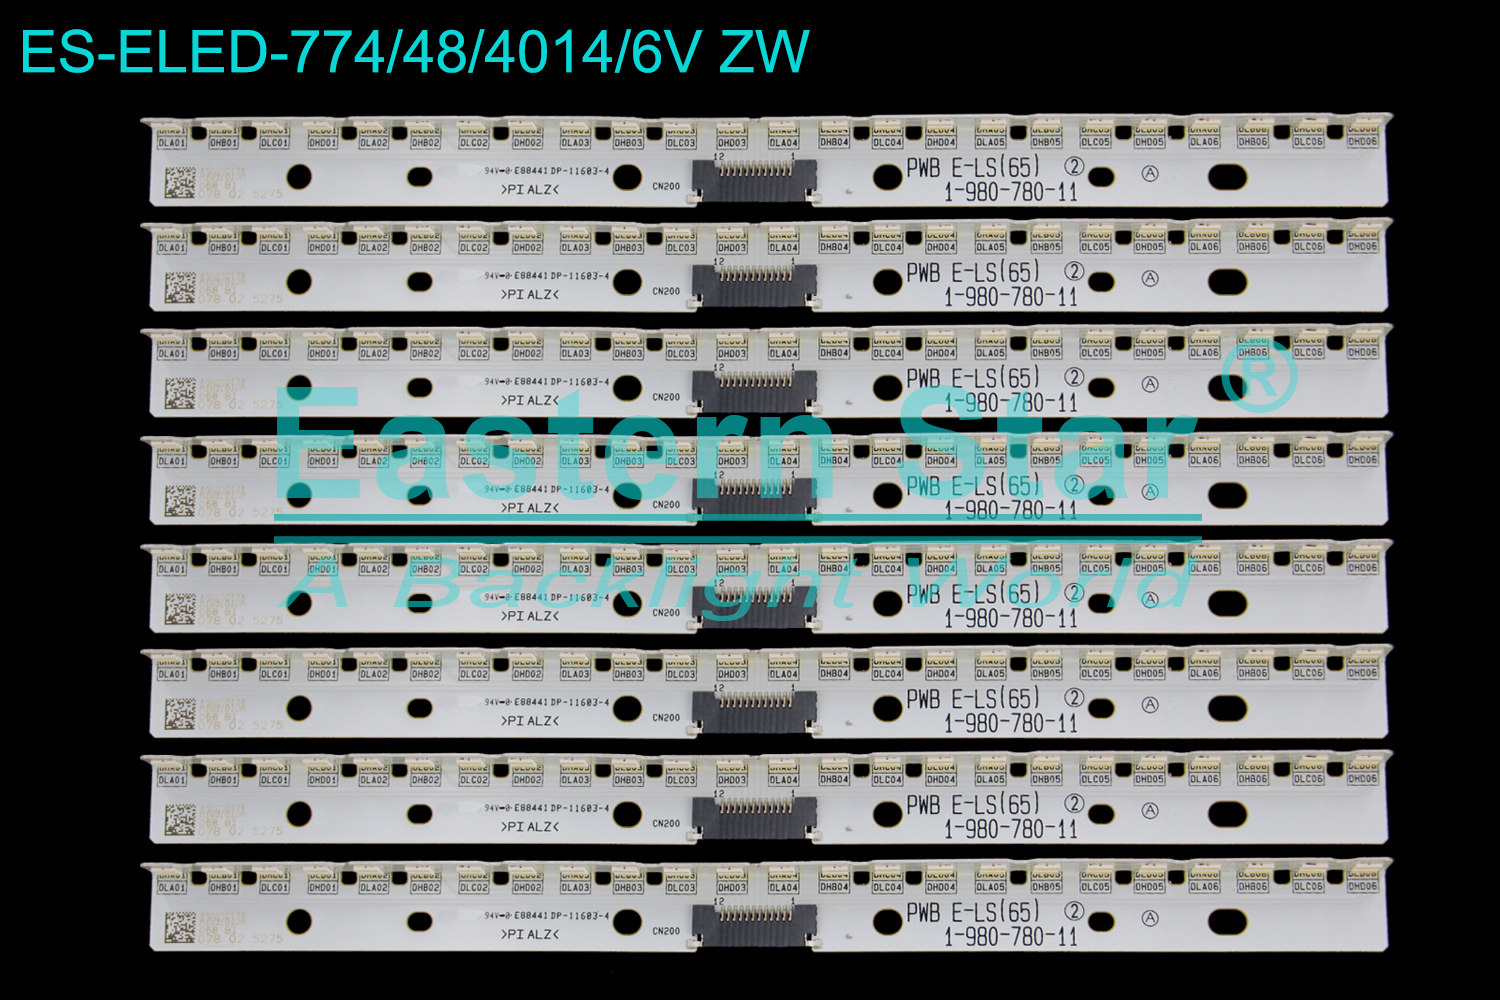 ES-ELED-774 ELED/EDGE TV backlight use for 65'' Sony XBR-65X930D 1-980-780-11 PWB E-LS(65) LED STRIPS(8)